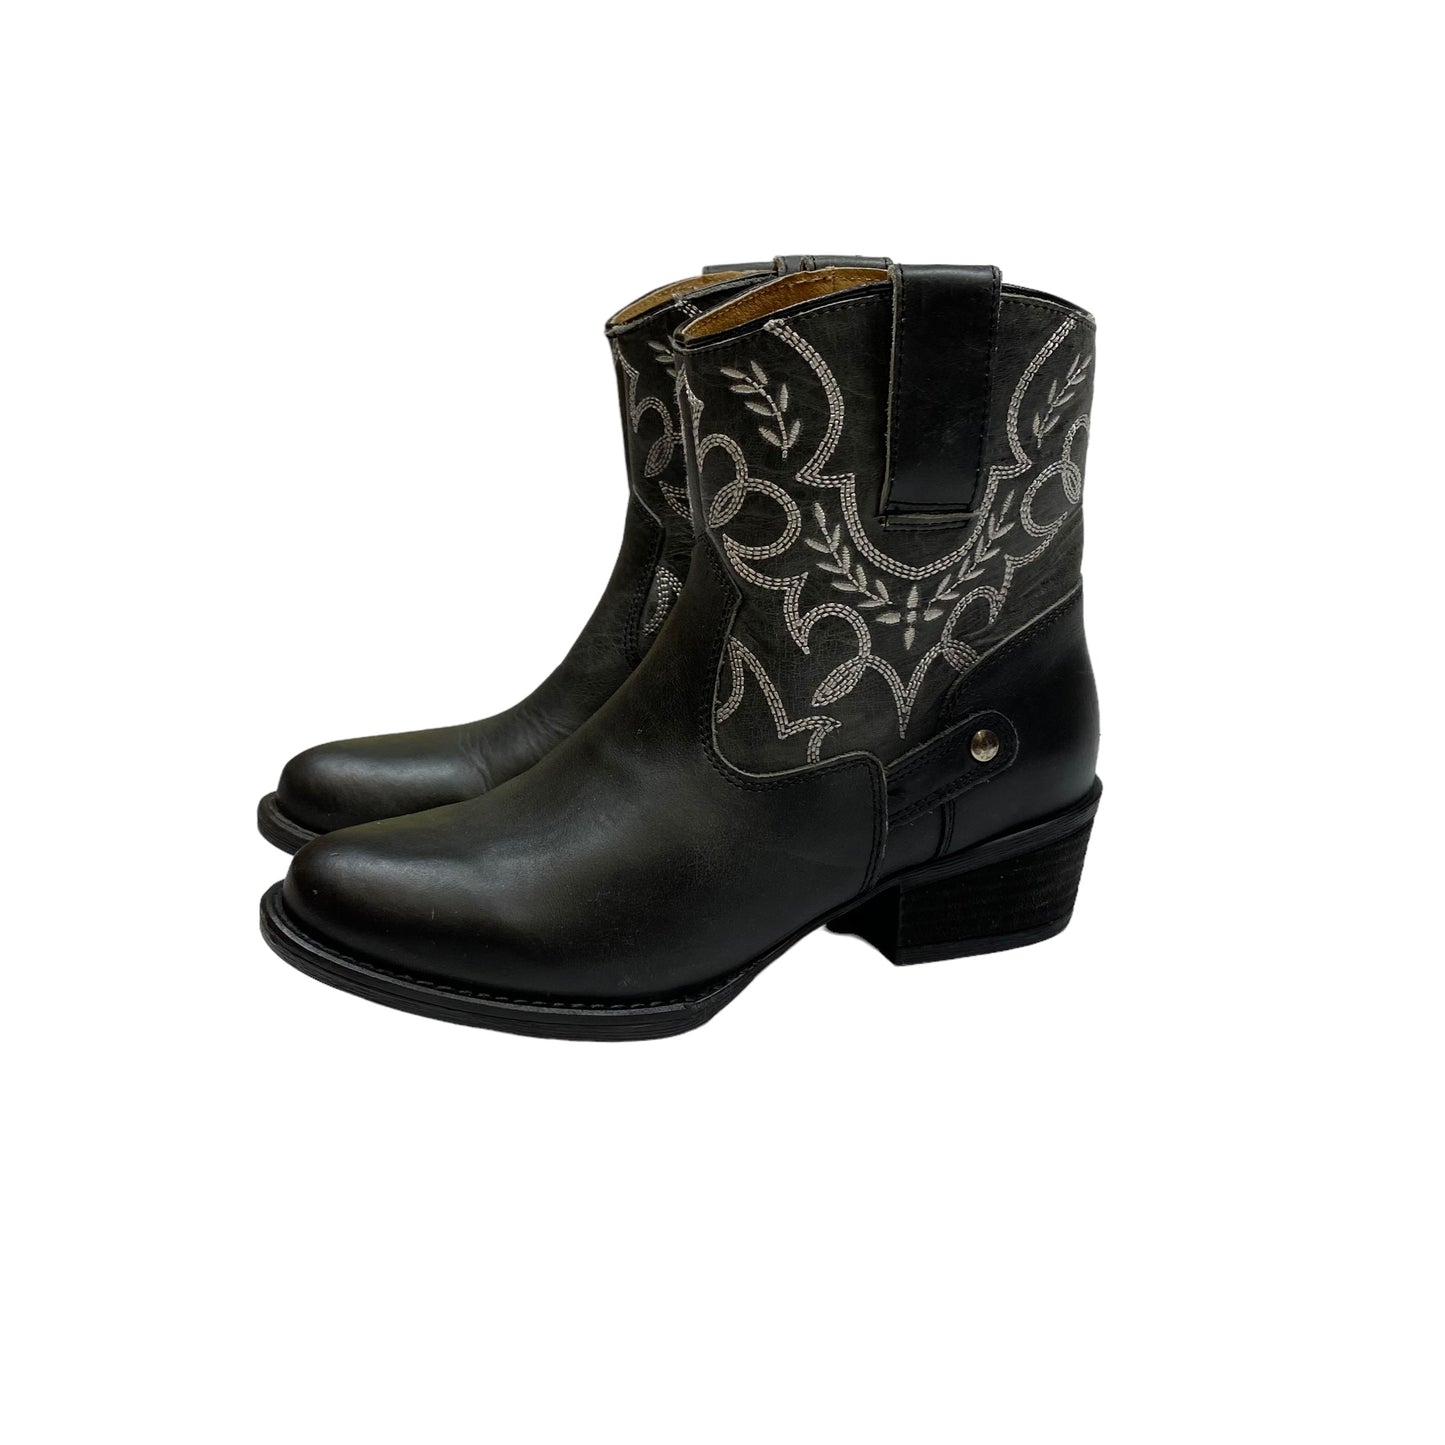 Black Boots Western Cmb, Size 7